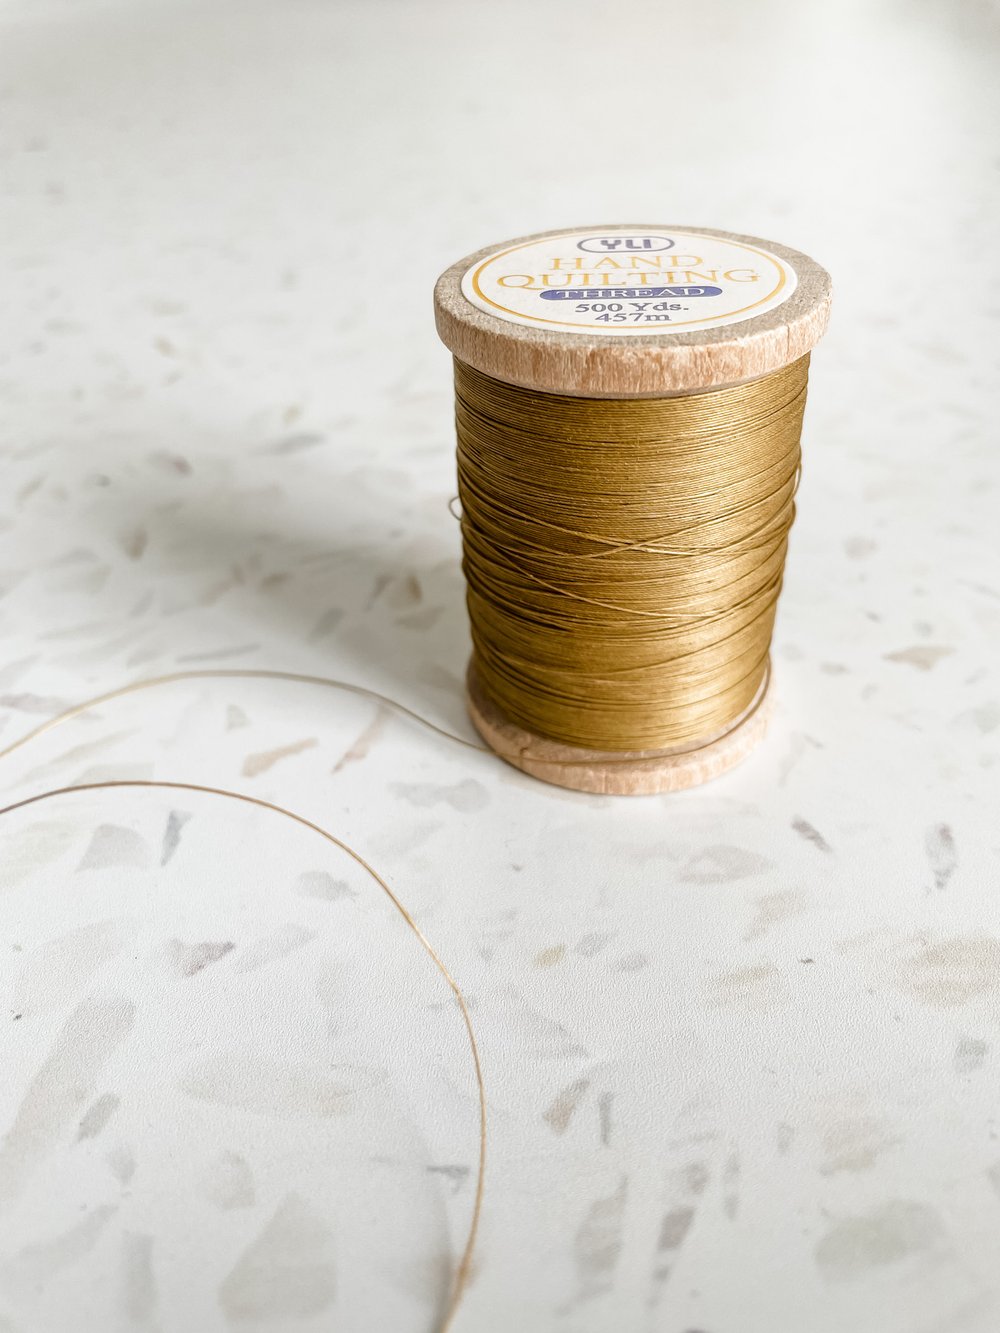 Cotton Hand Quilting Thread 3-Ply 500yd - Light Brown by YLI